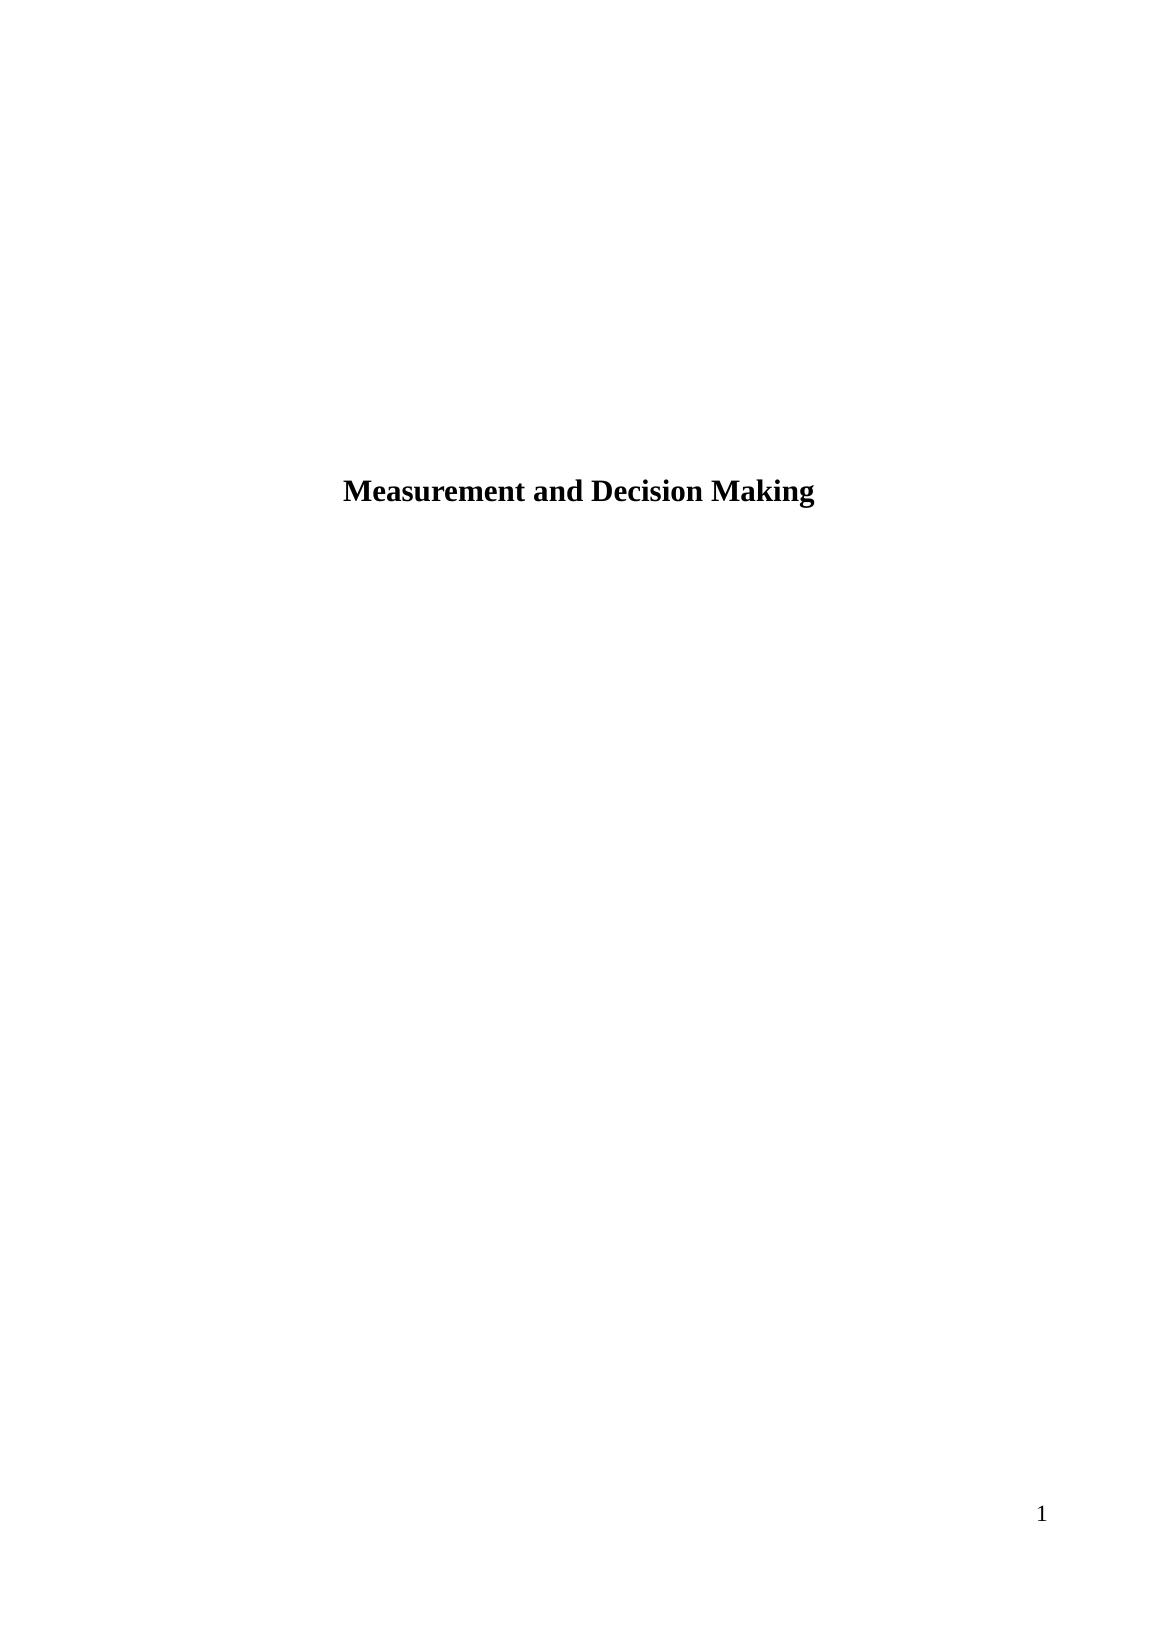 Measurement and Decision Making Assignment_1